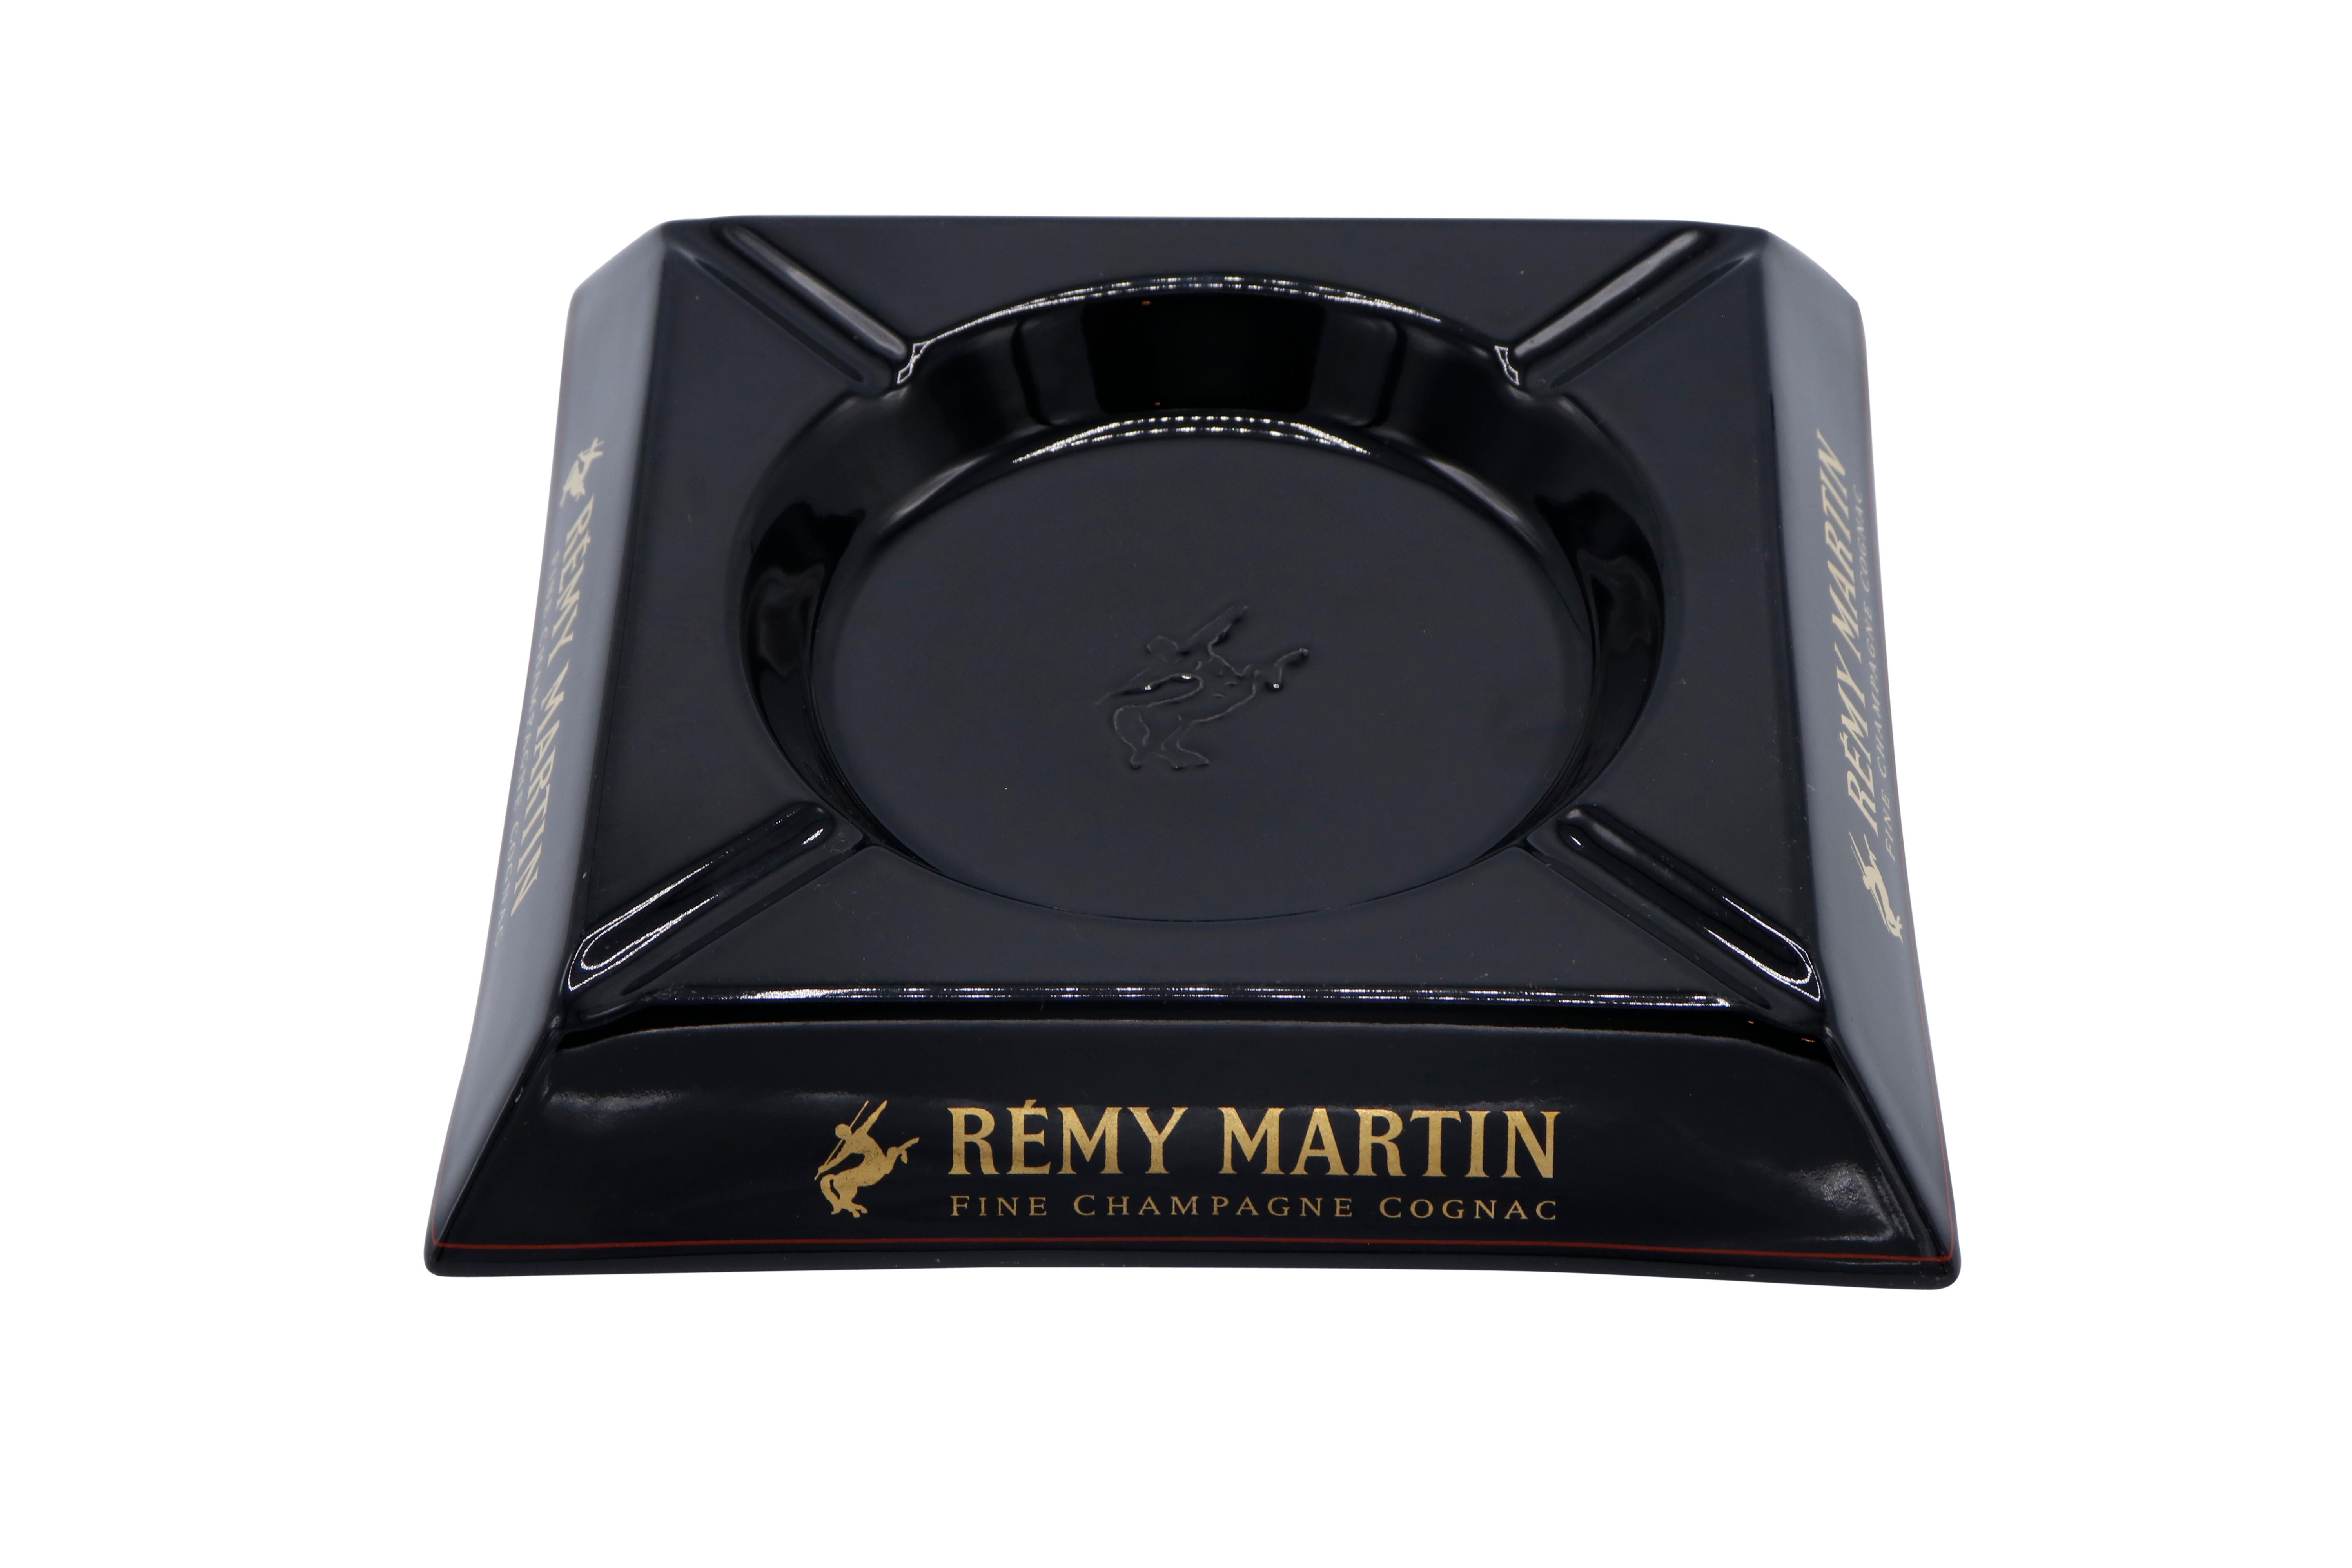 A French black square ceramic ashtray made by Rémy Martin. A central circular tray is embossed with the Rémy Martin logo, a centaur wielding a spear. Each corner has a beveled cigarette rest and the sides are decorated with the brand name and logo